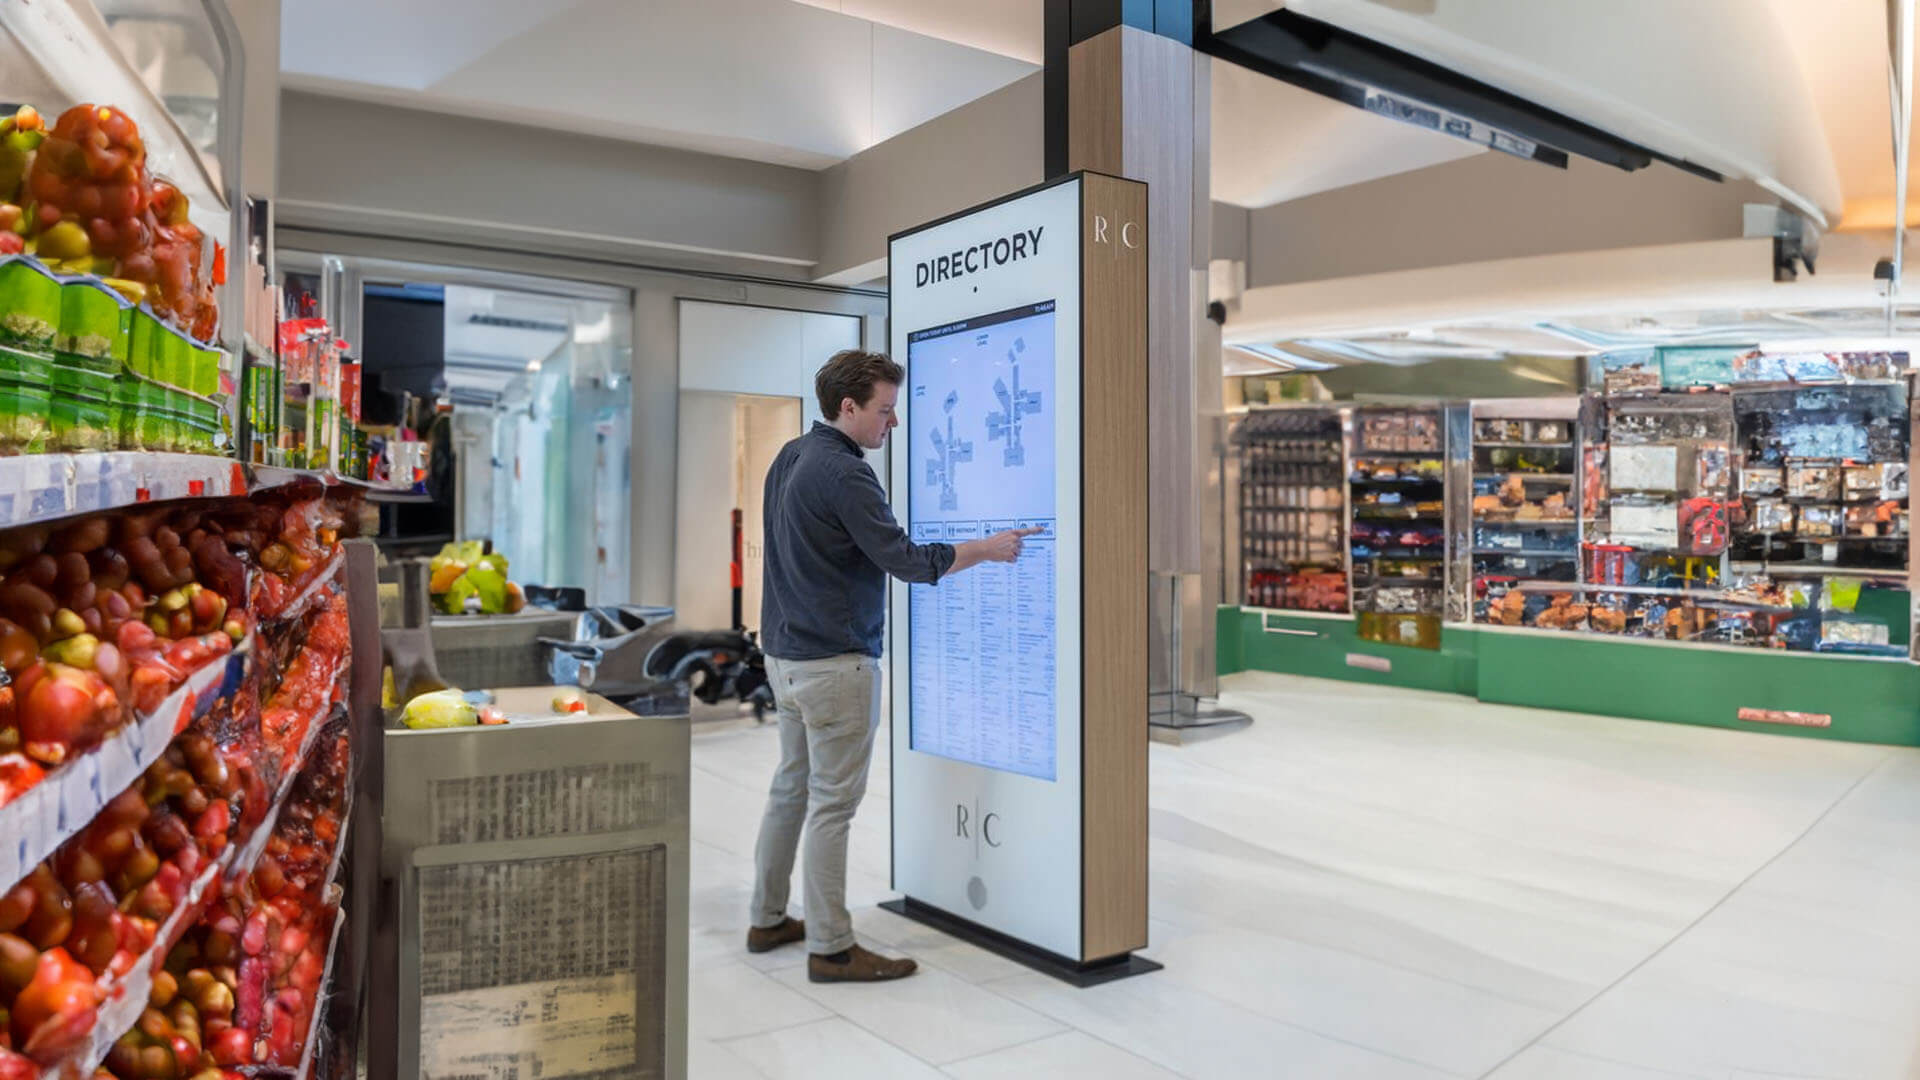 The benefits of using digital wayfinding in grocery stores to improve customer experience.